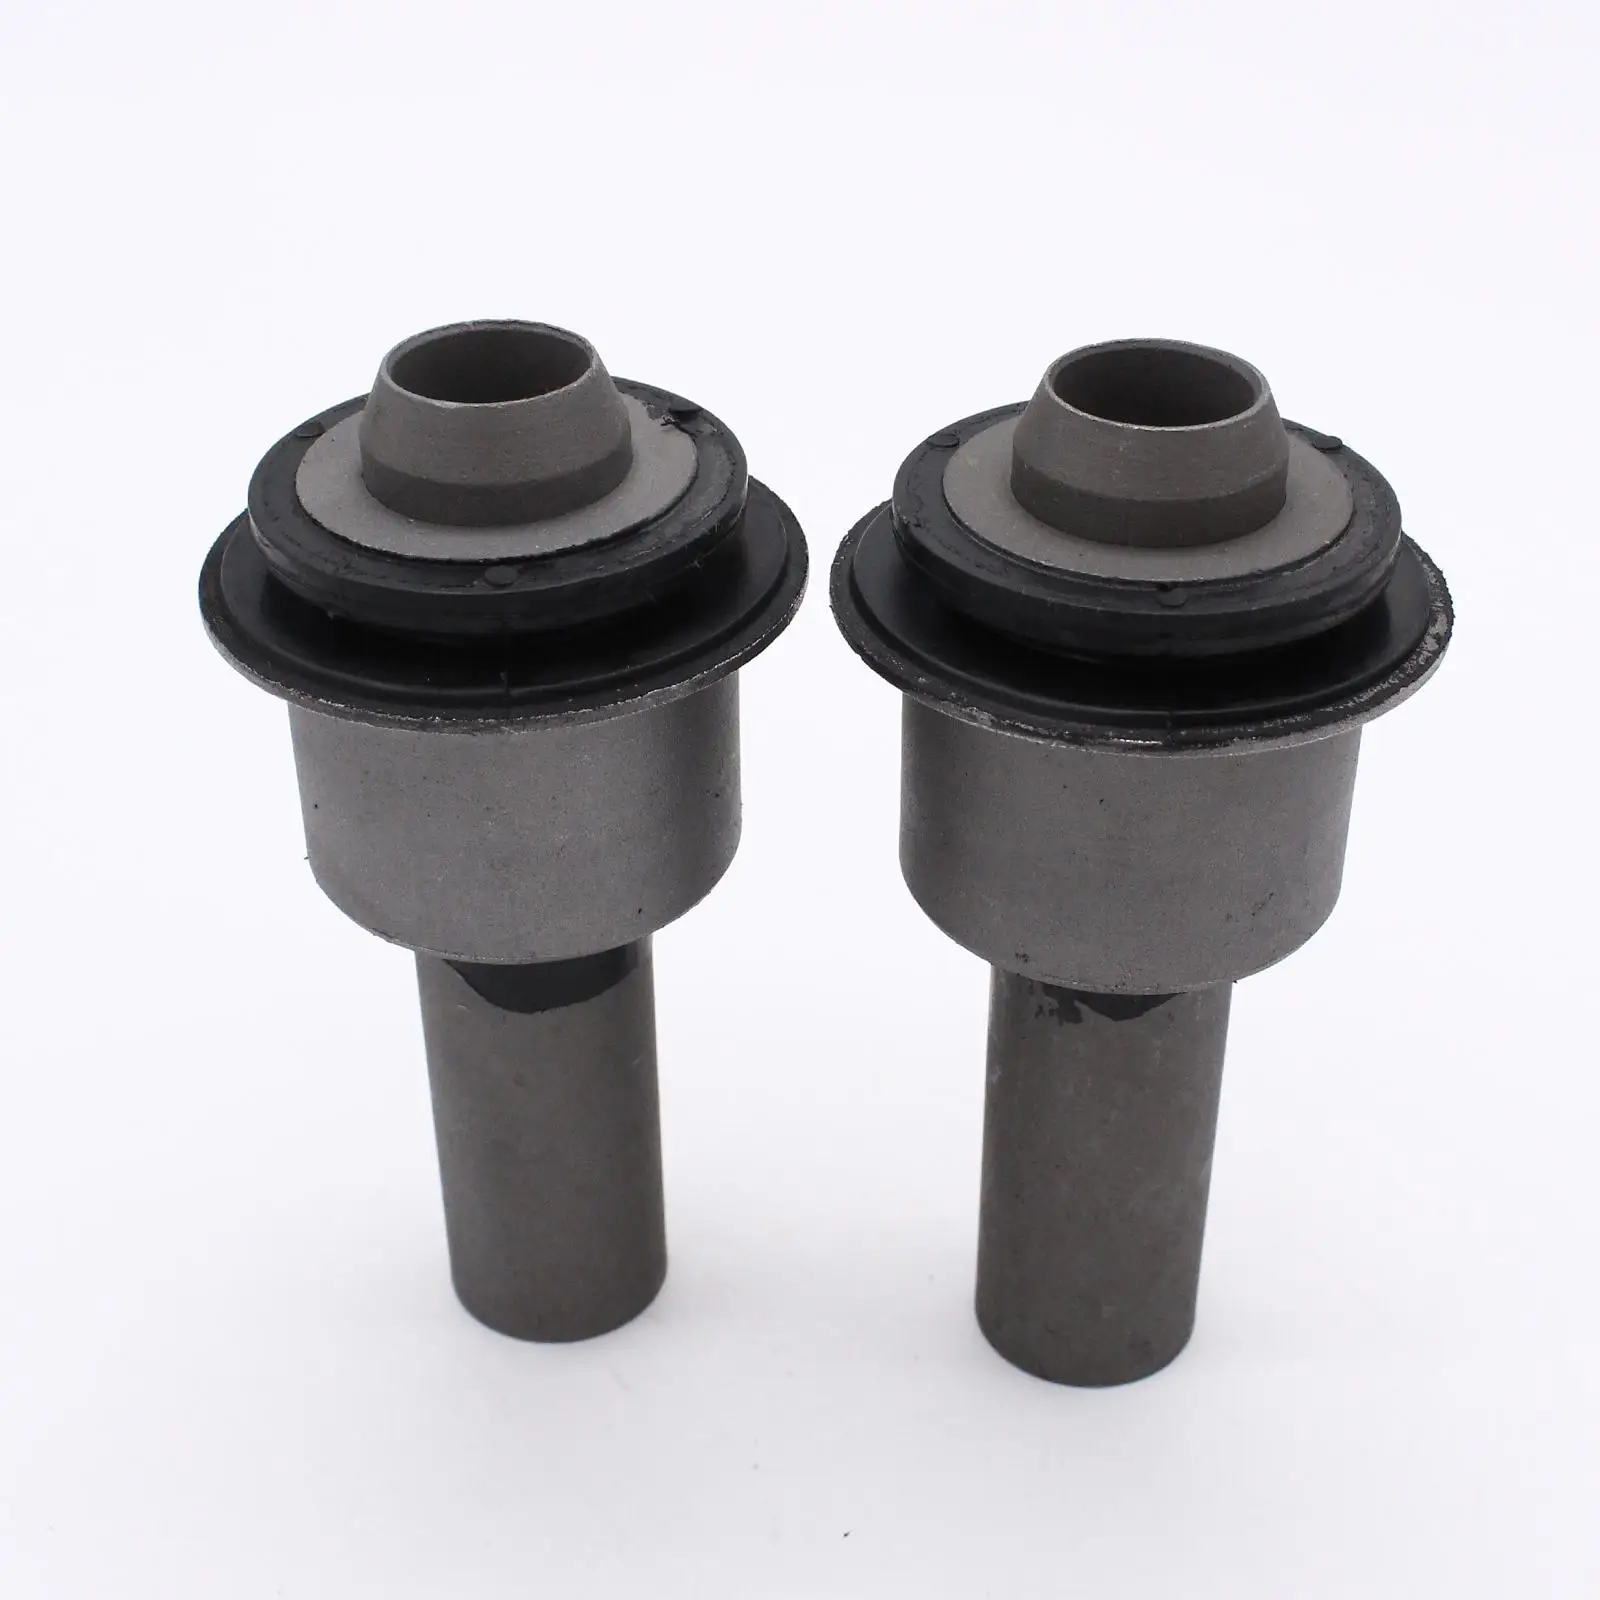 4Pcs Subframe Bushes Set 54467-Jd00A 54400-Jy20A 54466-Jd000 Replaces Professional Easy to Install Accessory Spare Parts